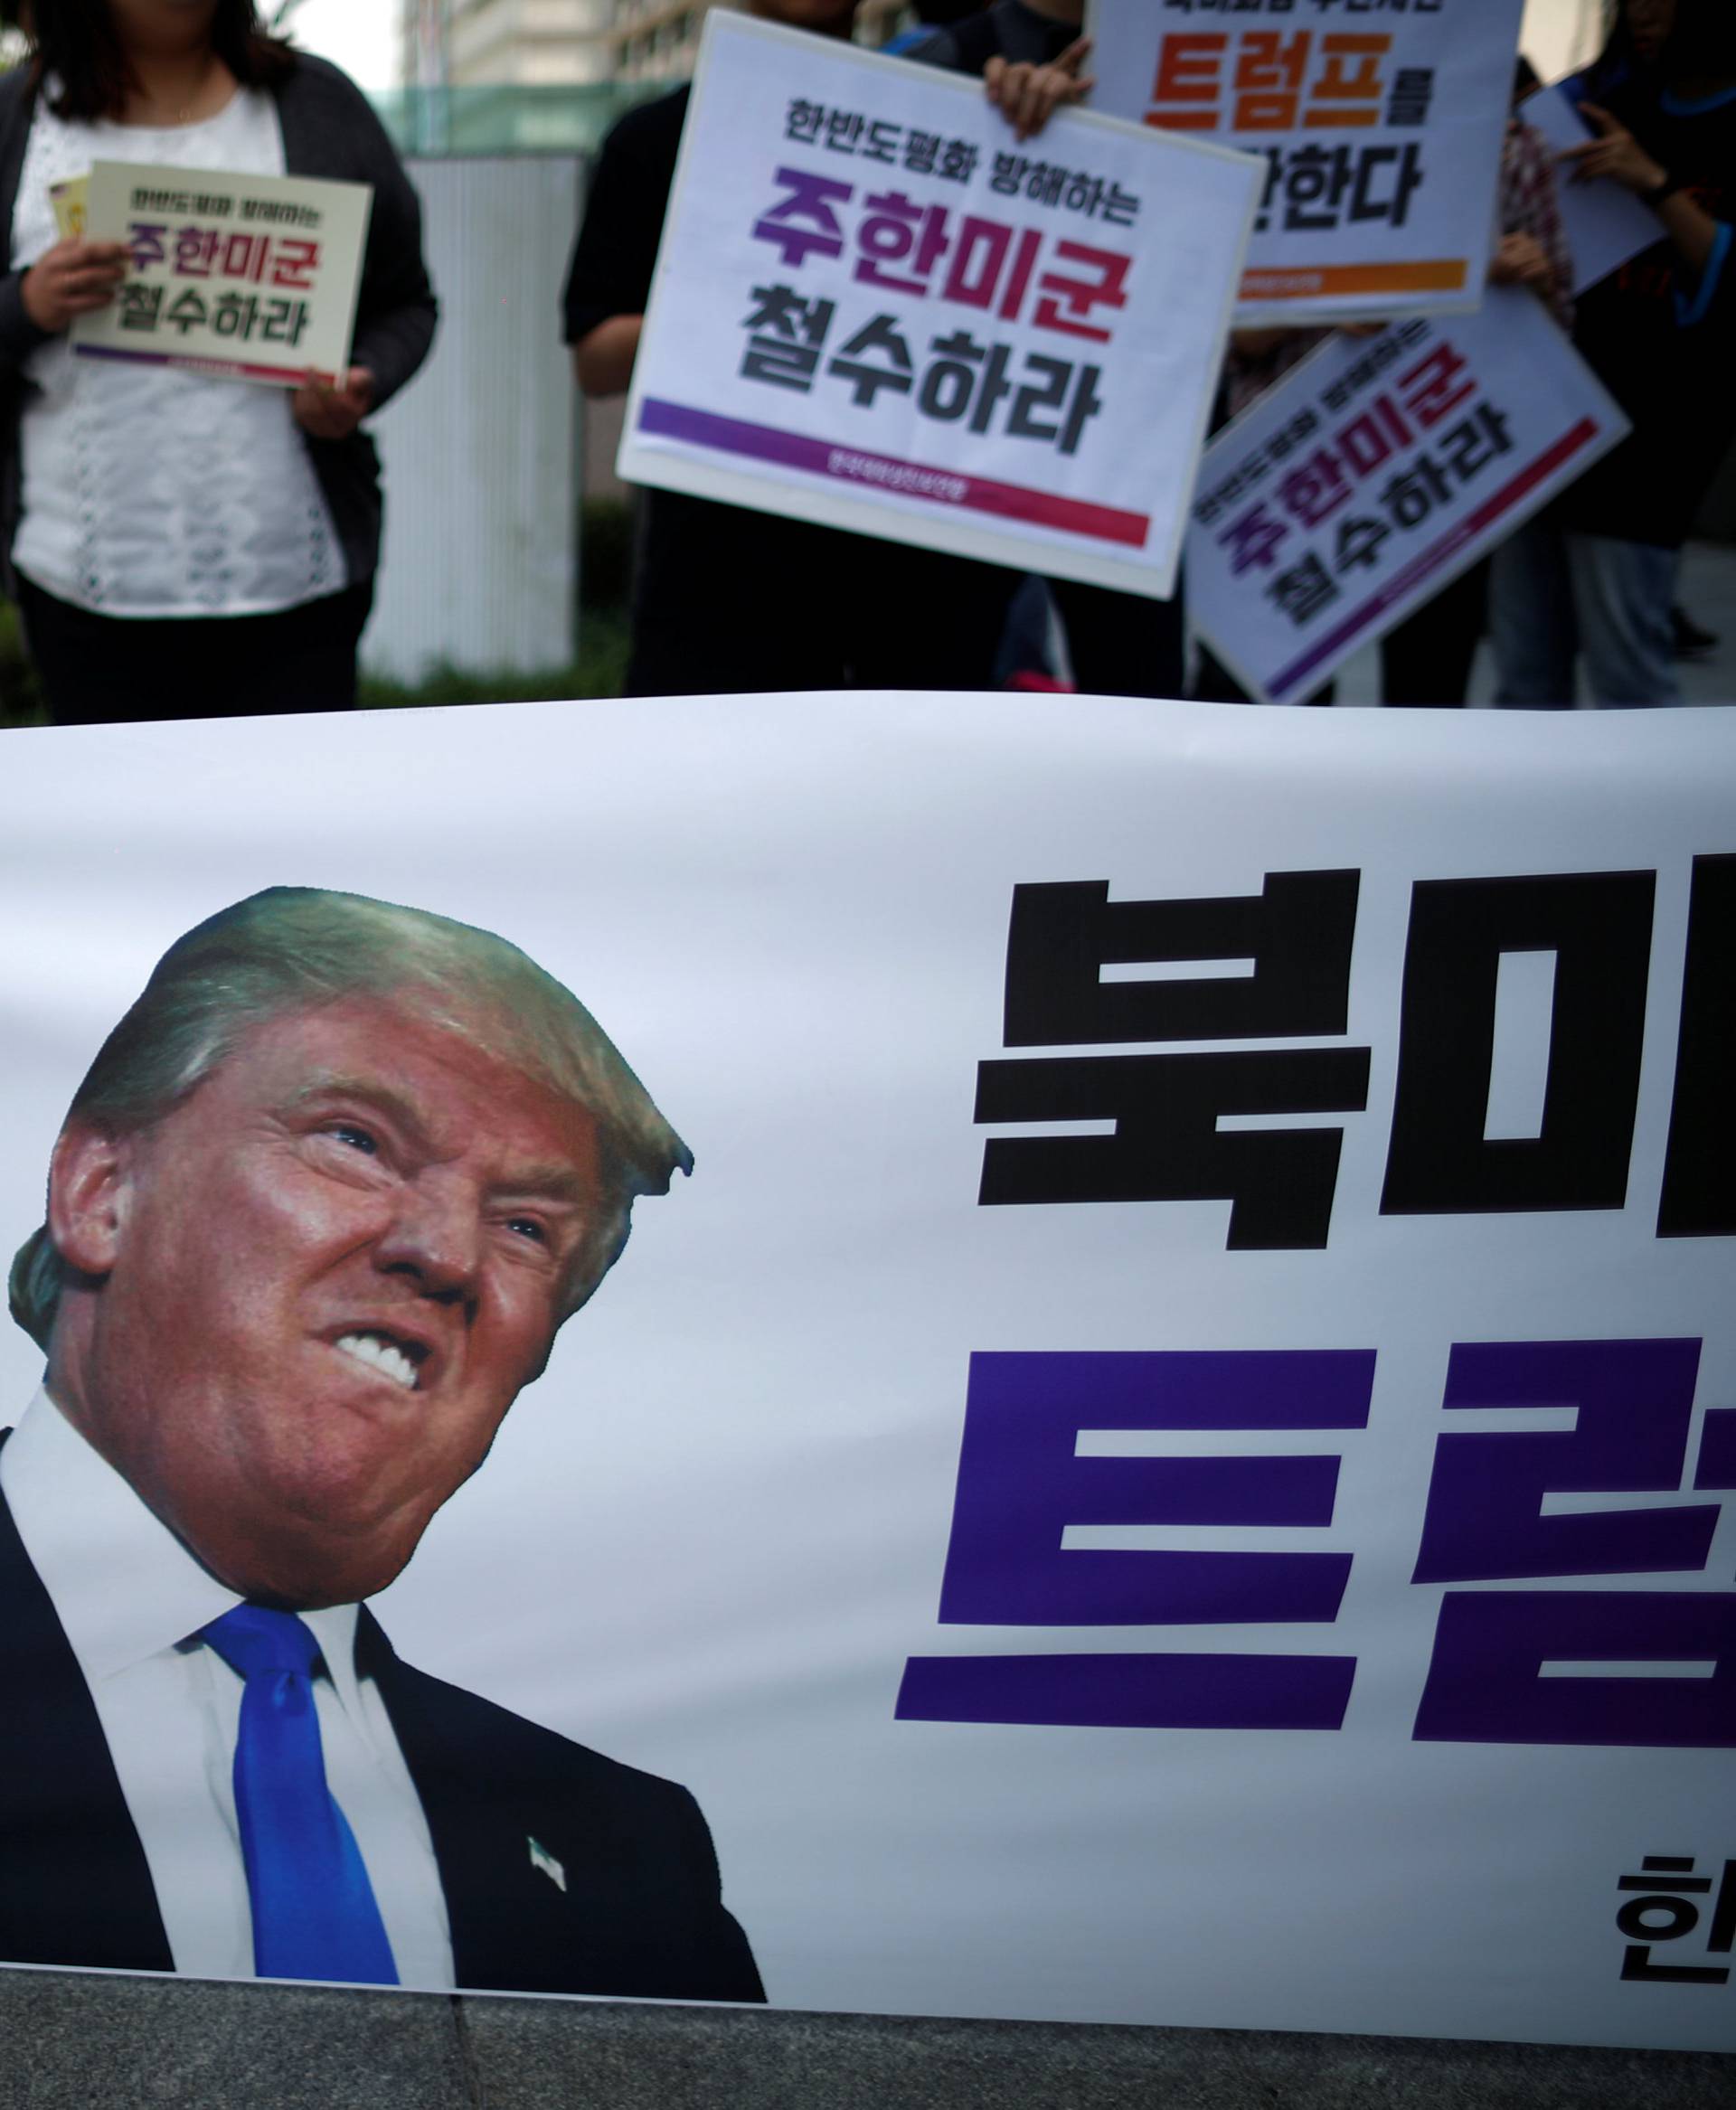 University students attend a protest against U.S. President Donald Trump near U.S. embassy in Seoul